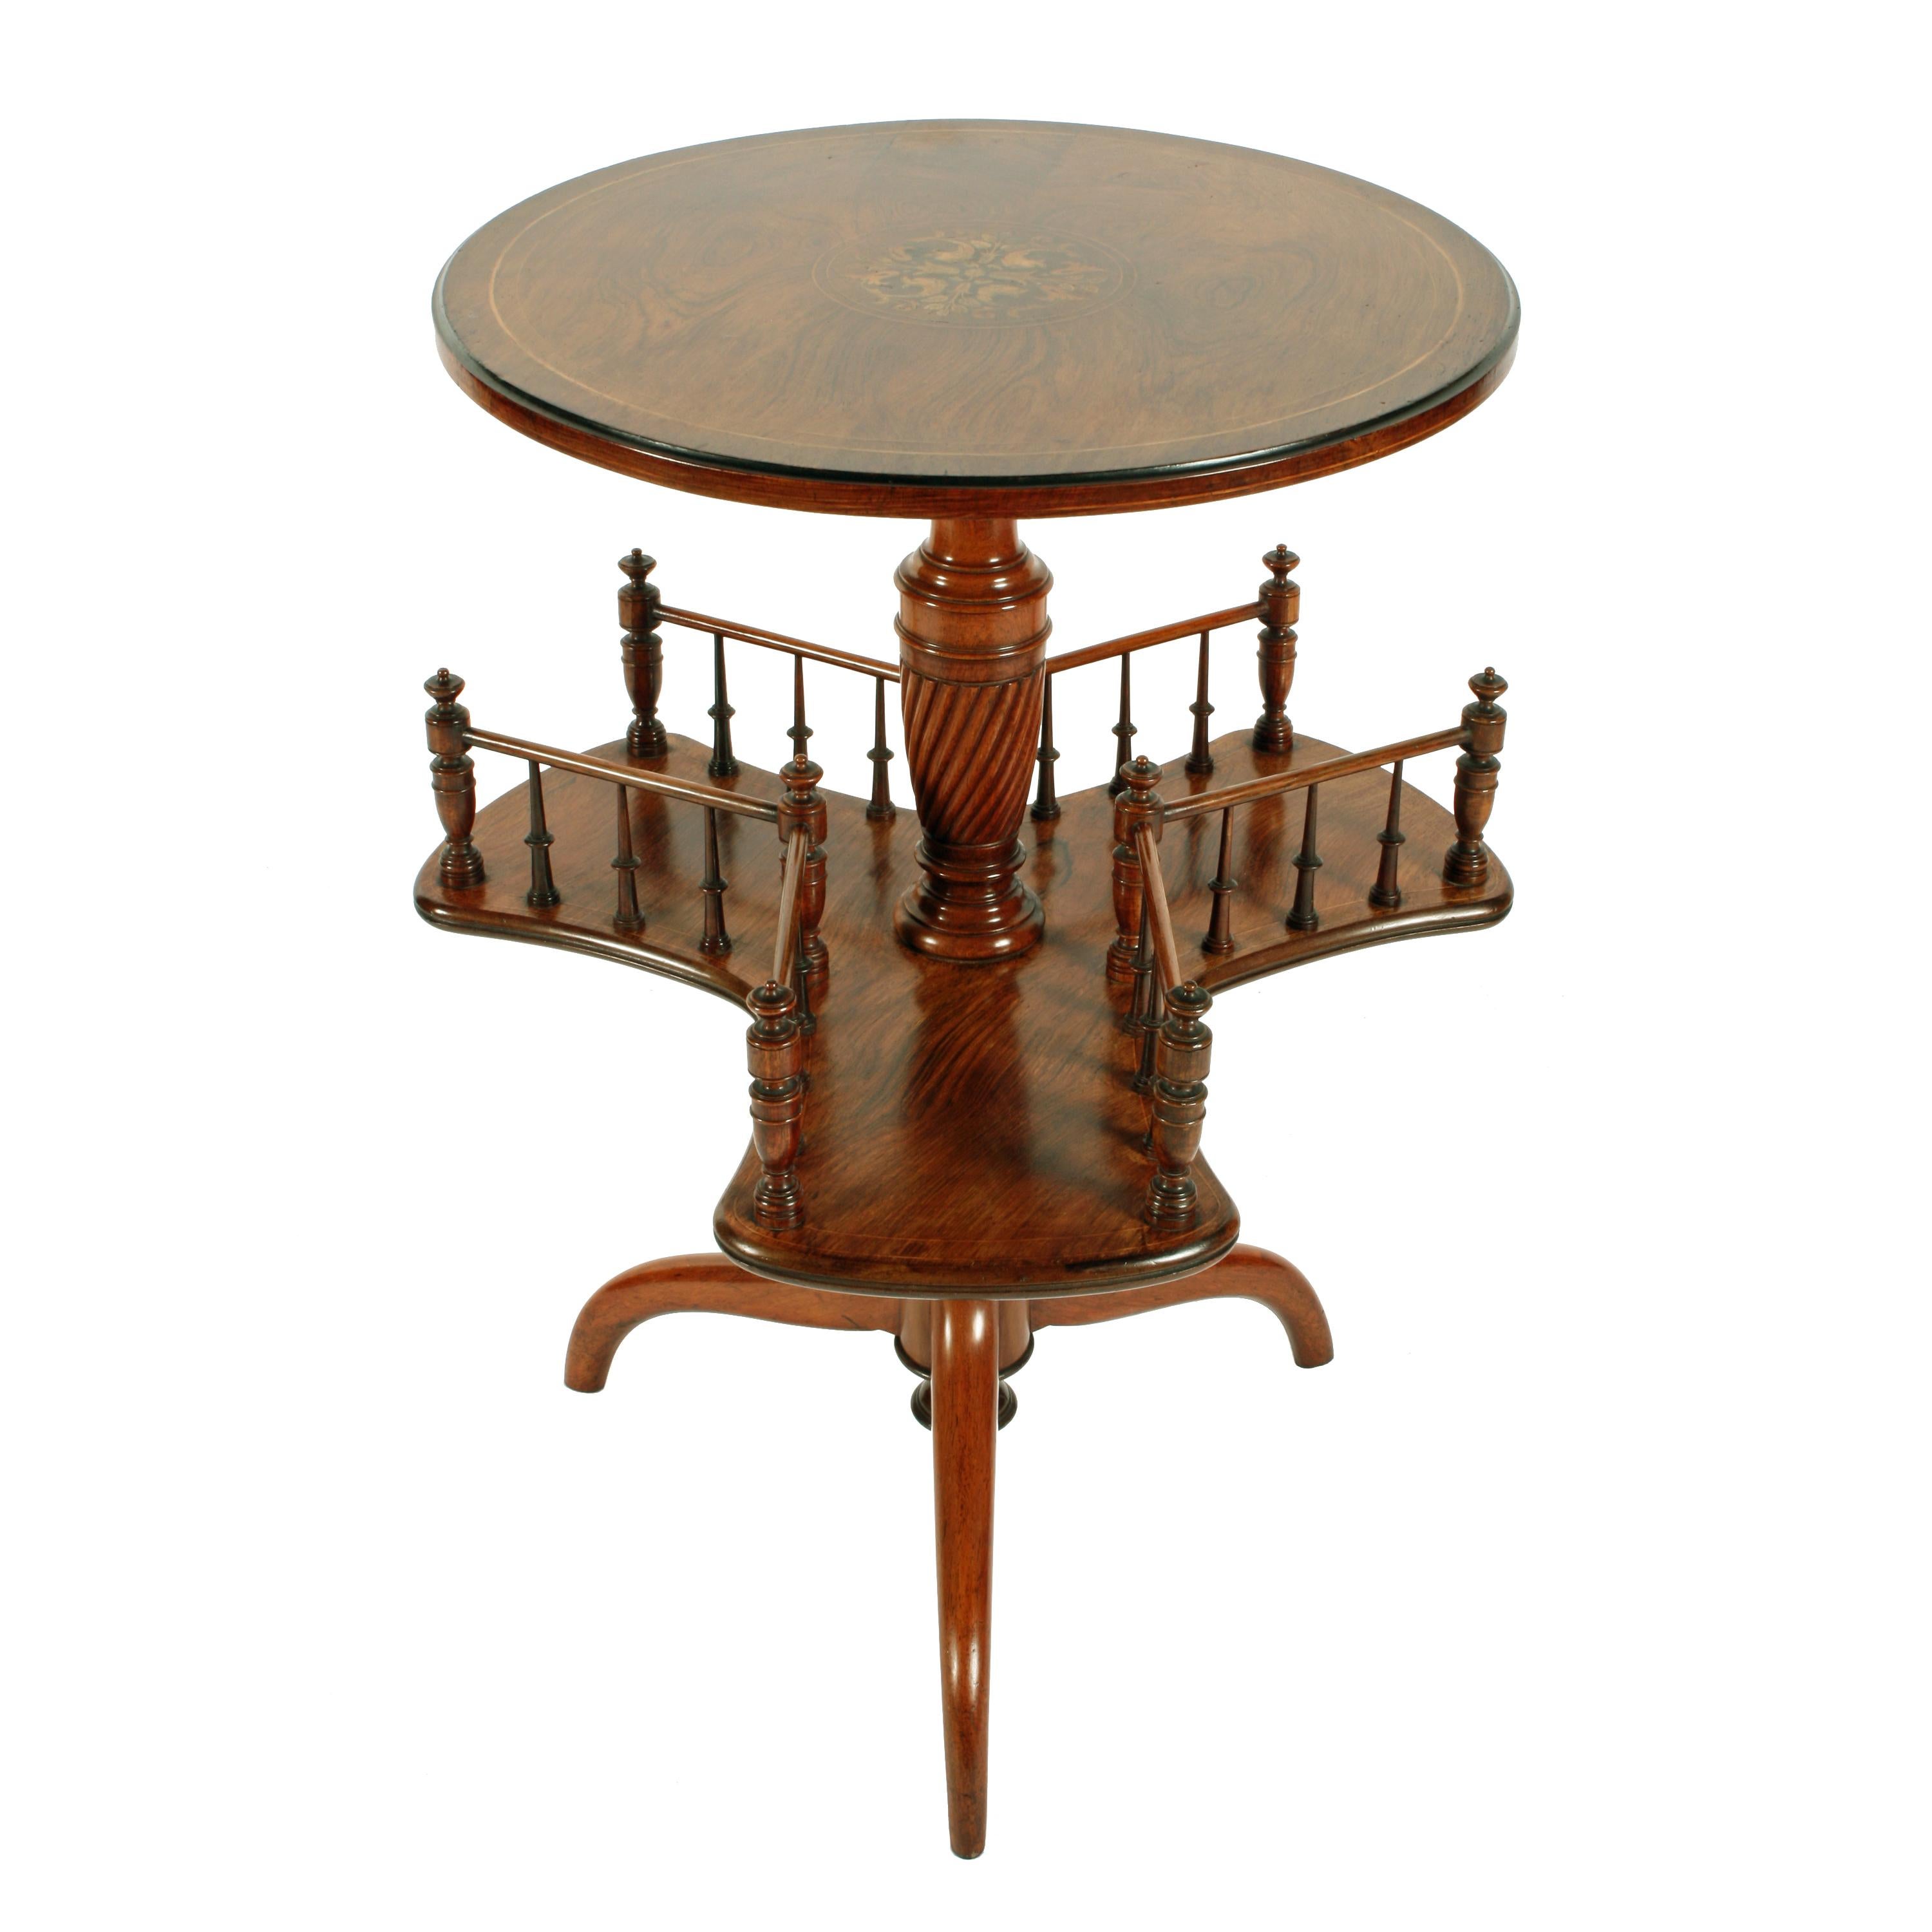 Rosewood marquetry inlaid book table


A 19th century rosewood book table with a marquetry inlaid top.

The table has a circular top that has a marquetry inlaid decoration in the centre and is box wood strung.

Below the top is a revolving